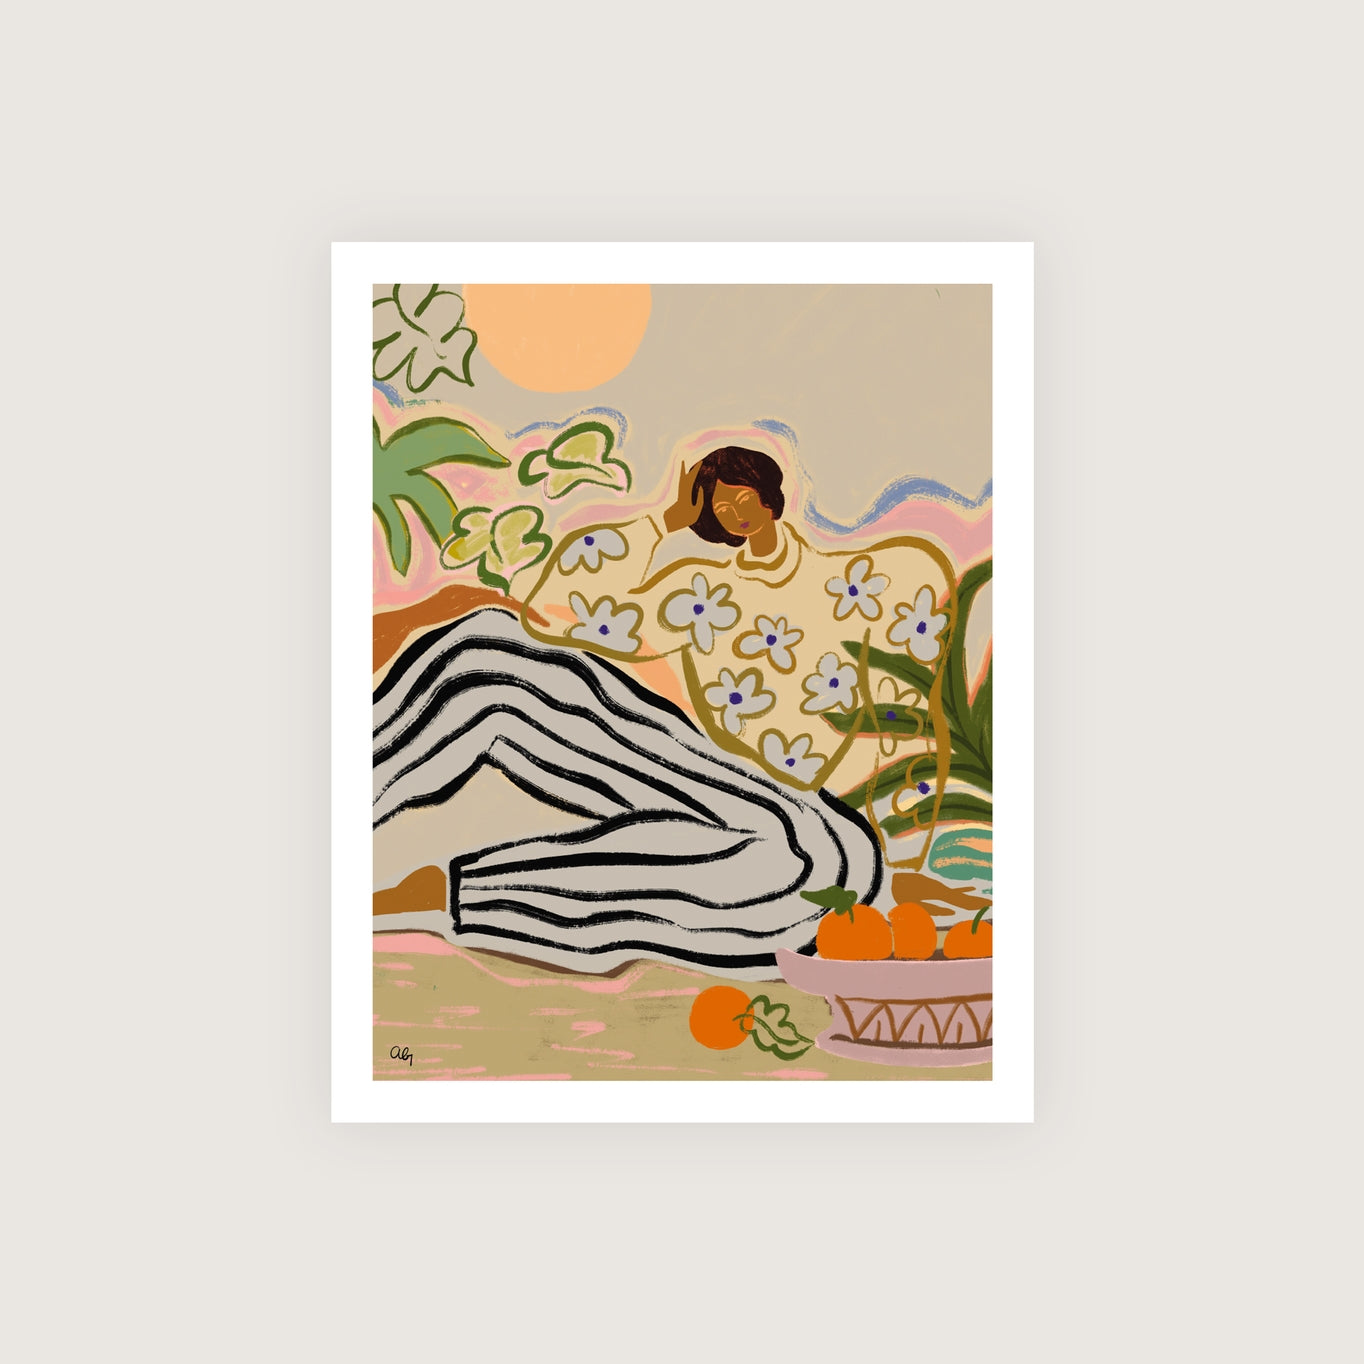 The Lazy Days Print by Someday Studio. Measures 8 x 10", printed on premium paper and packaged in 100% compostable cello sleeve.